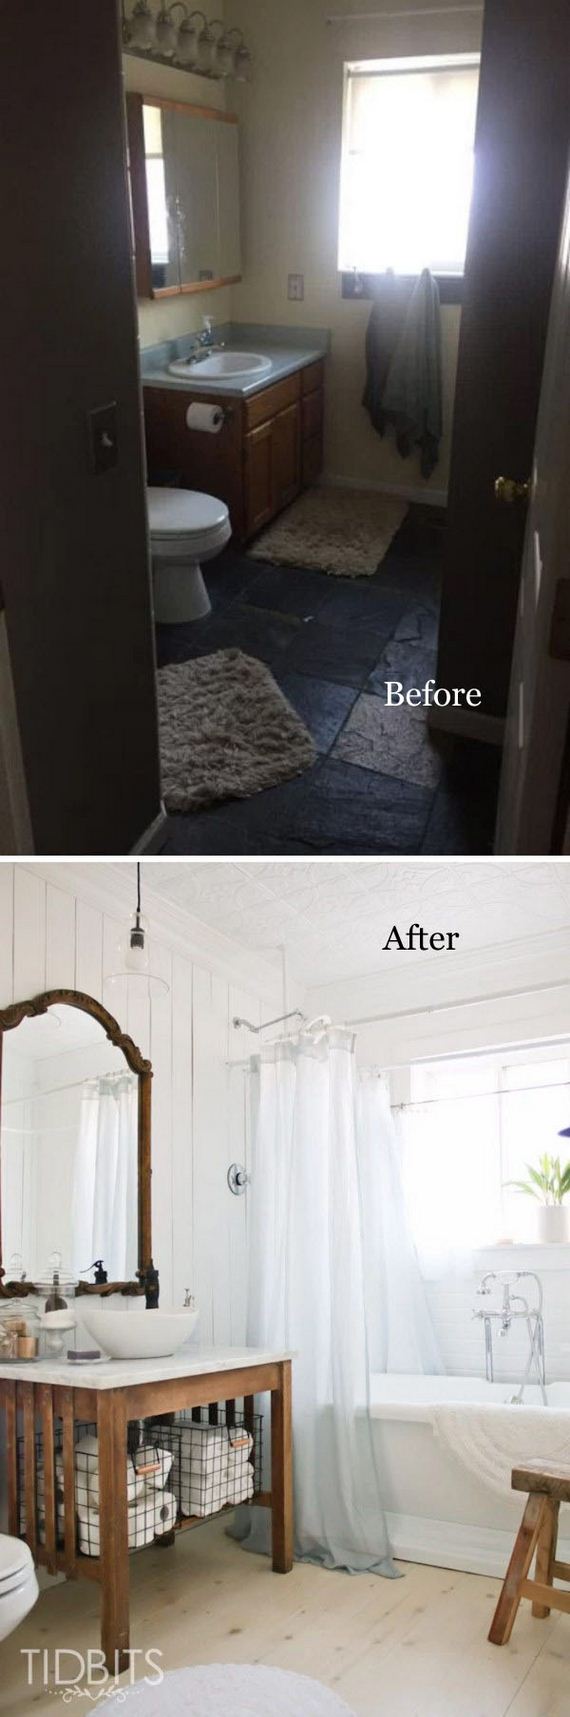 05-awesome-bathroom-makeovers